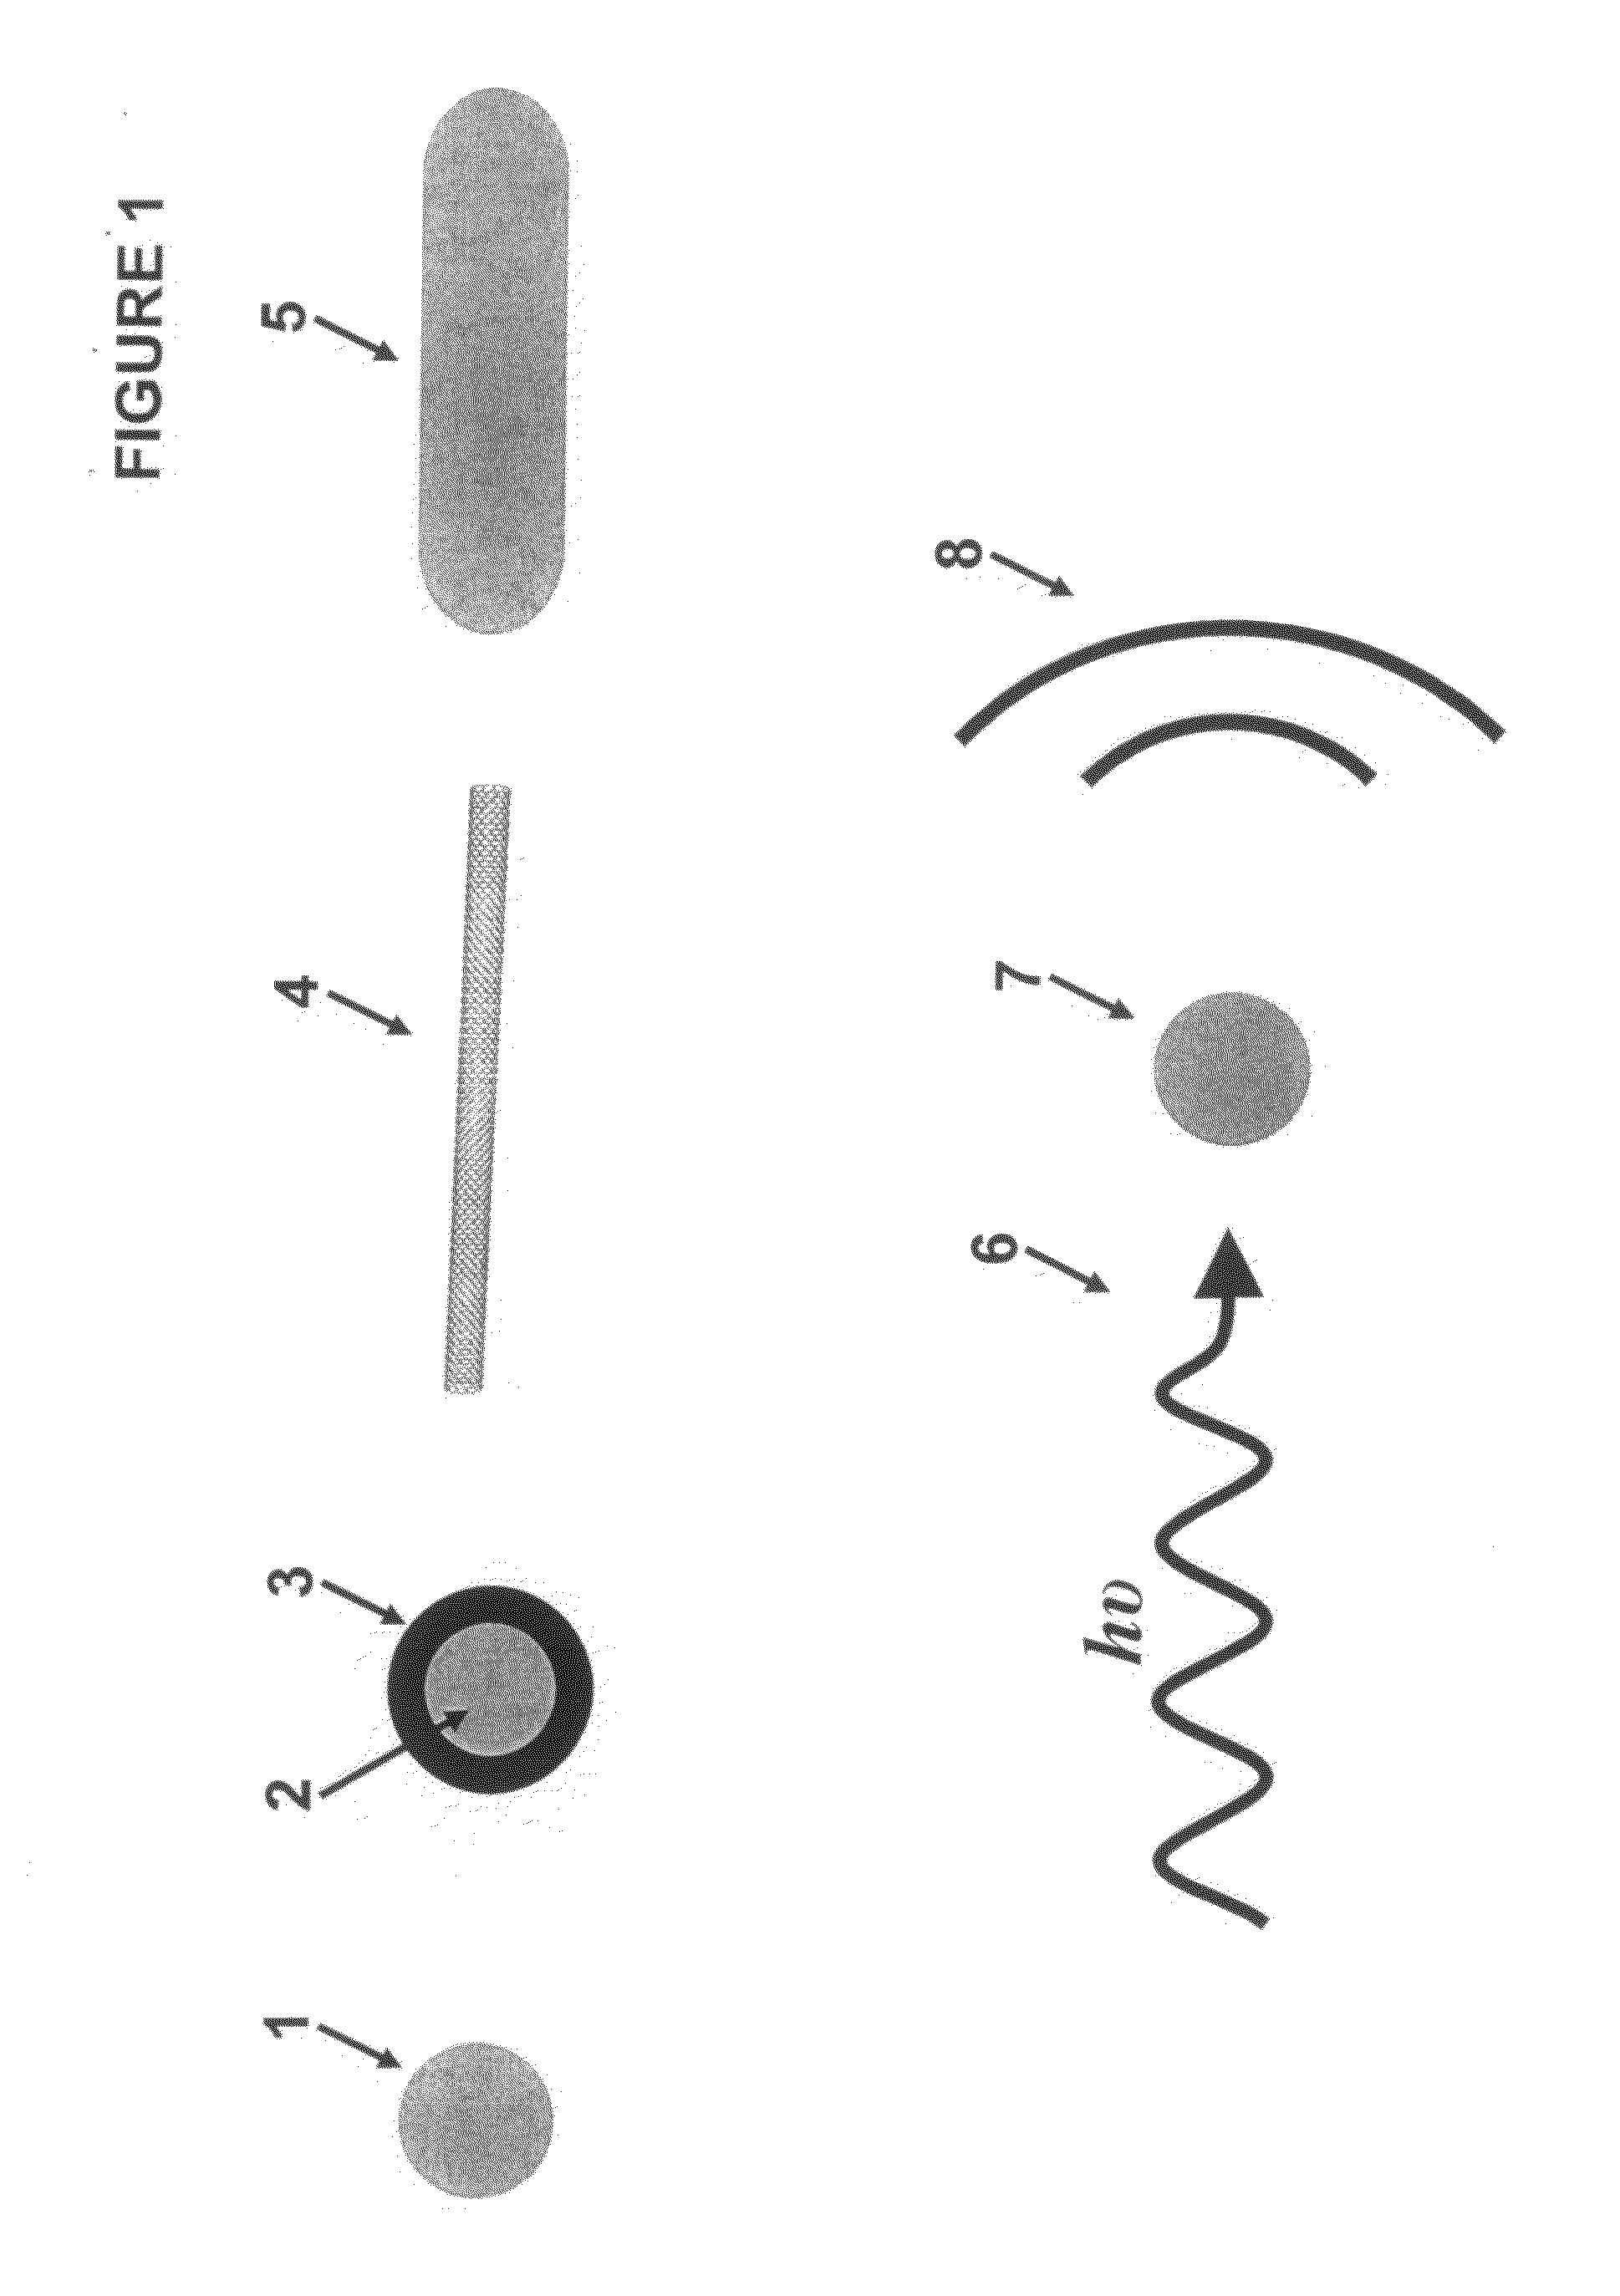 Method for targeted local heat ablation using nanoparticles